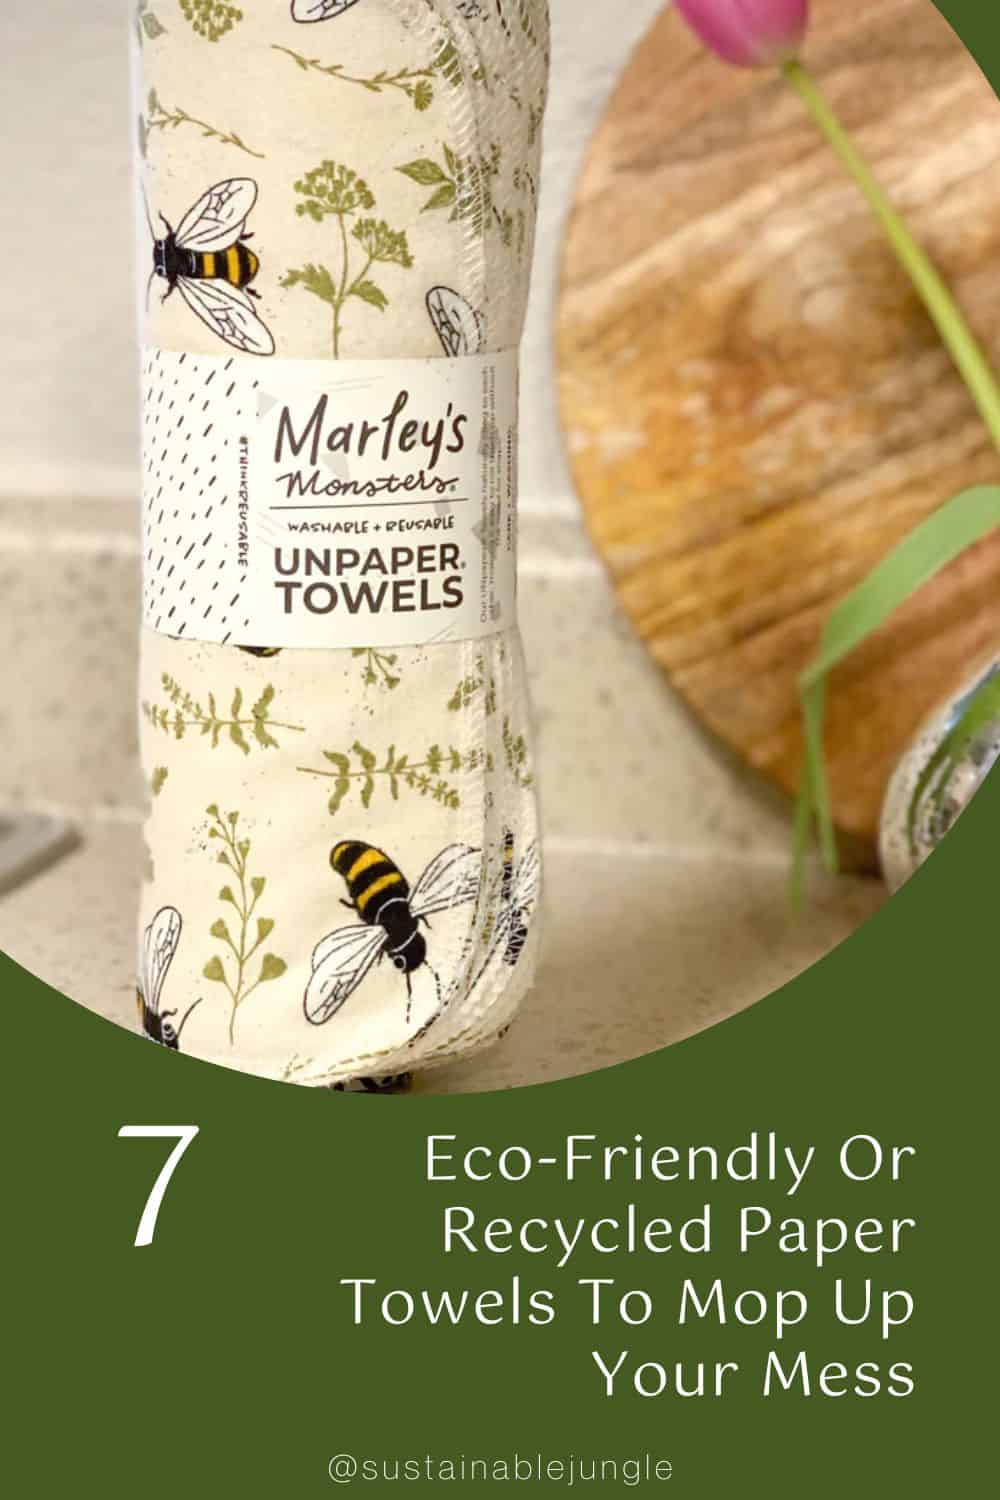 7 Eco-Friendly Or Recycled Paper Towels To Mop Up Your Mess Image by Marley’s Monsters #recycledpapertowels #bestrecycledpapertowels #papertowelsthatareecofriendly #ecofriendlypapertowels #ecofriendlydisposablepapertowels #papertowelsthatareecofriendly #sustainablejungle